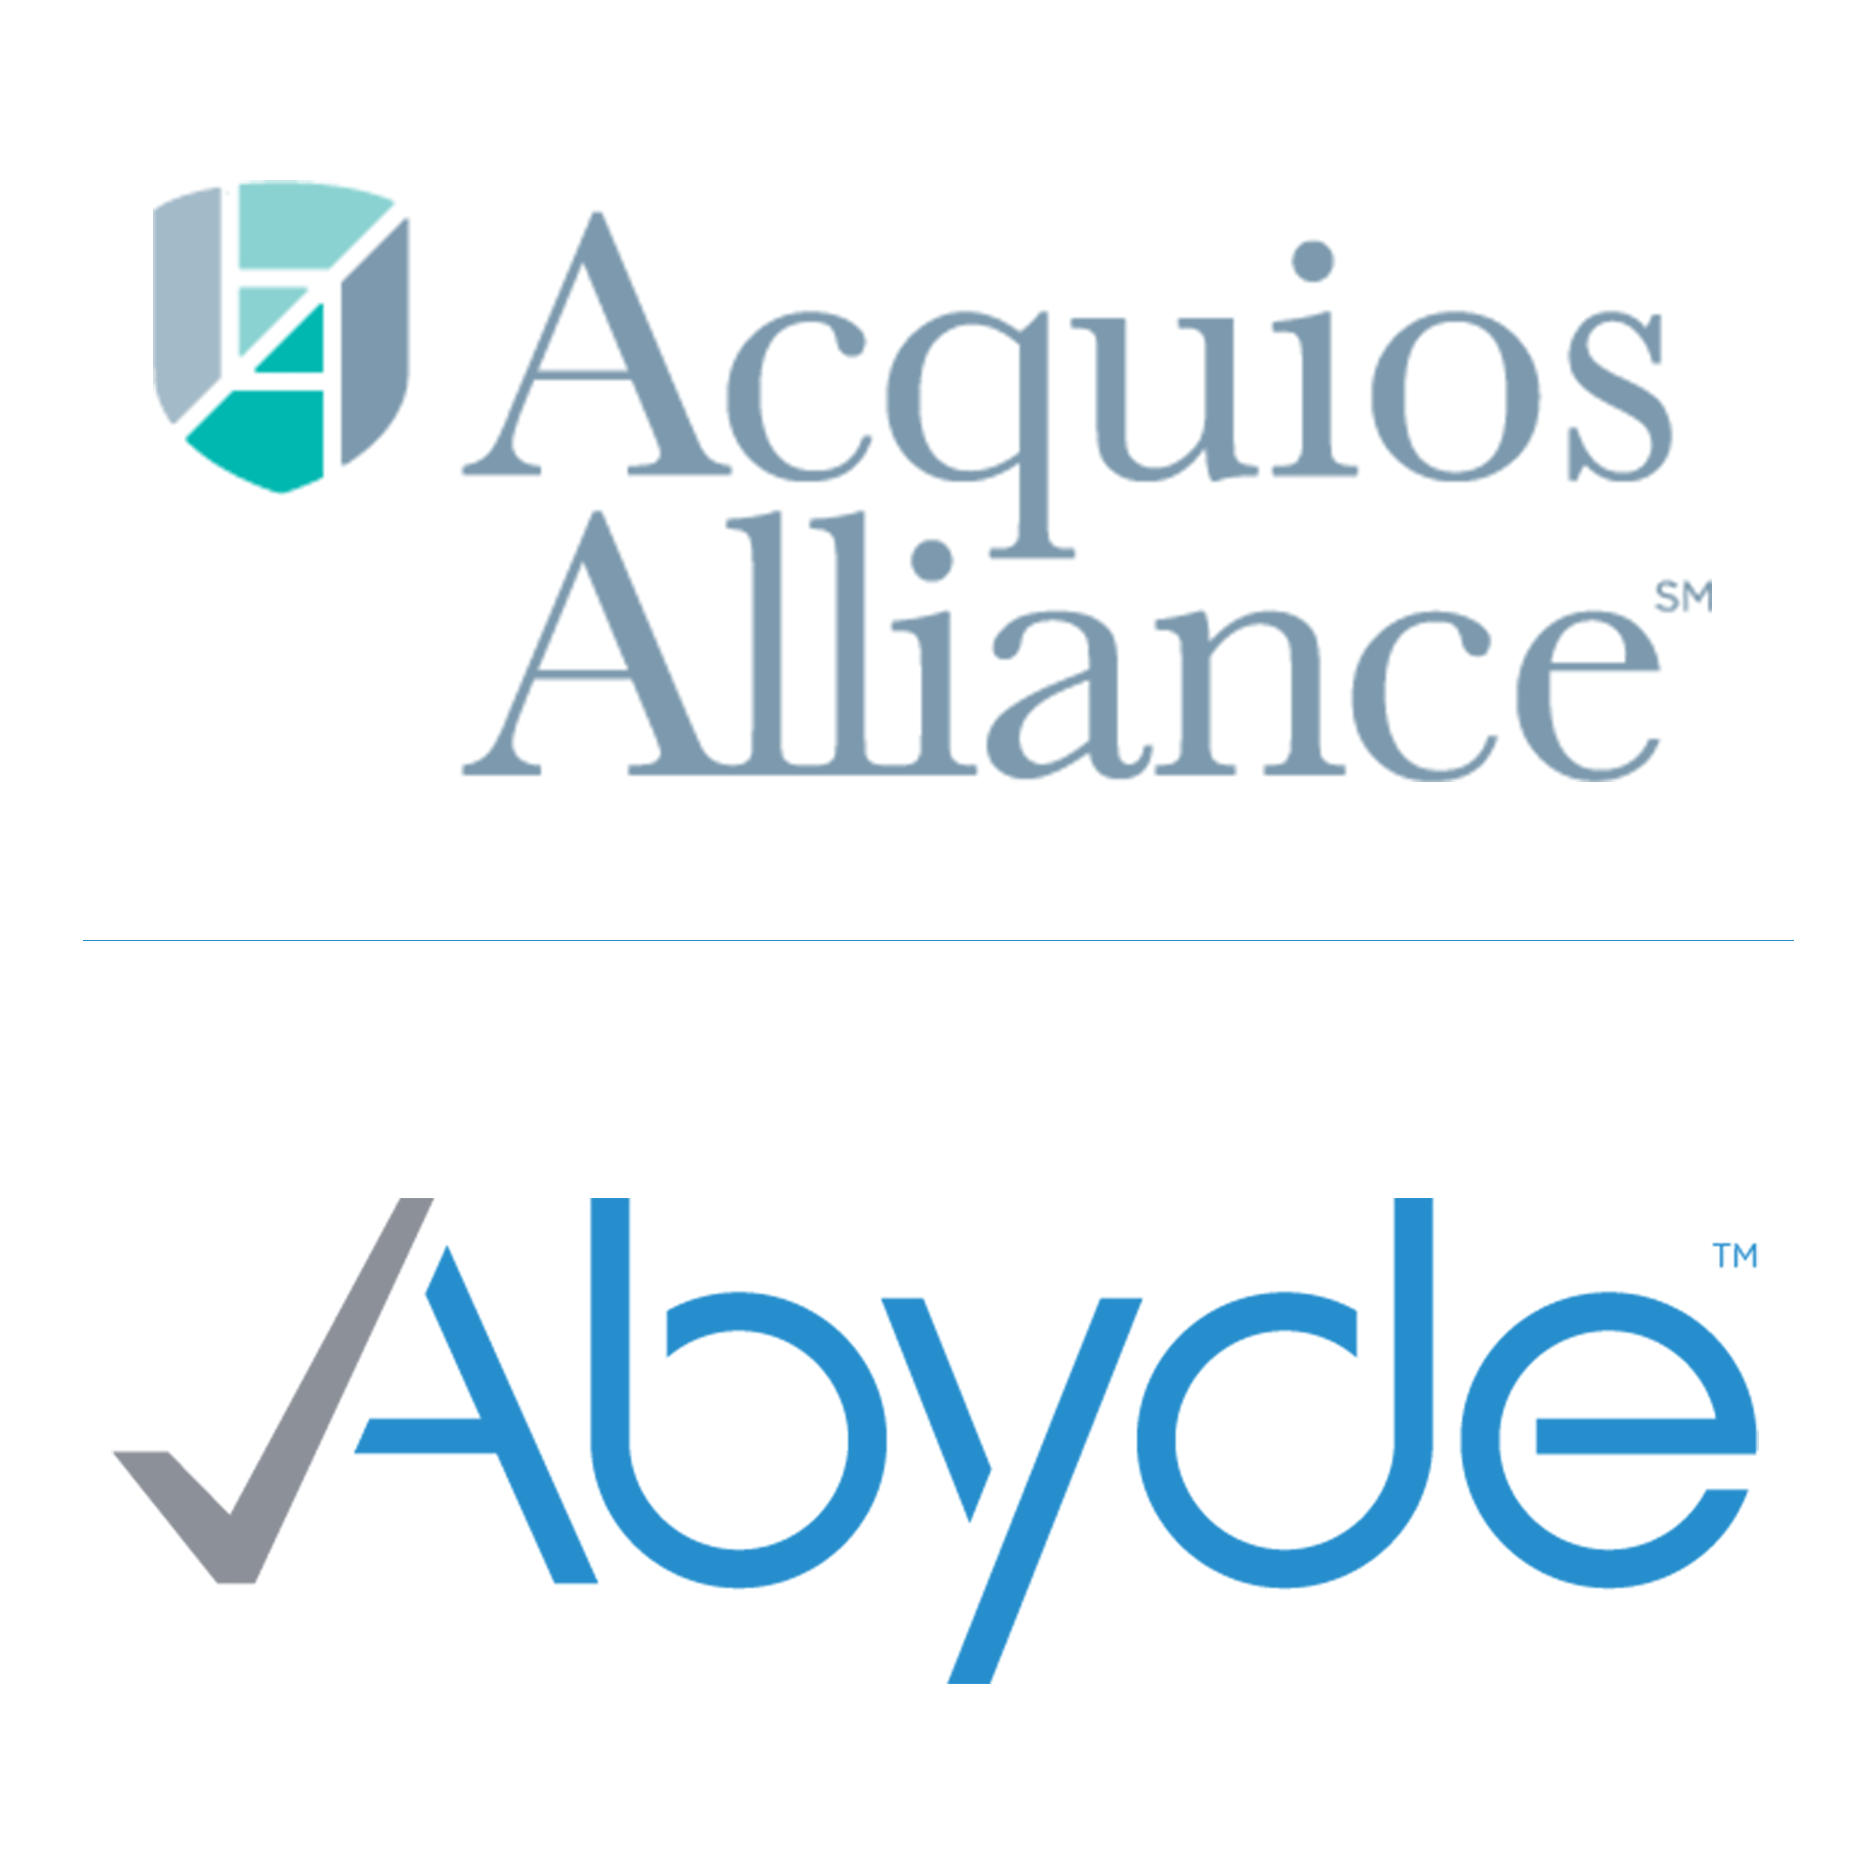 Abyde partners with Acquios Alliance to deliver HIPAA compliance solutions to private practice optometrists